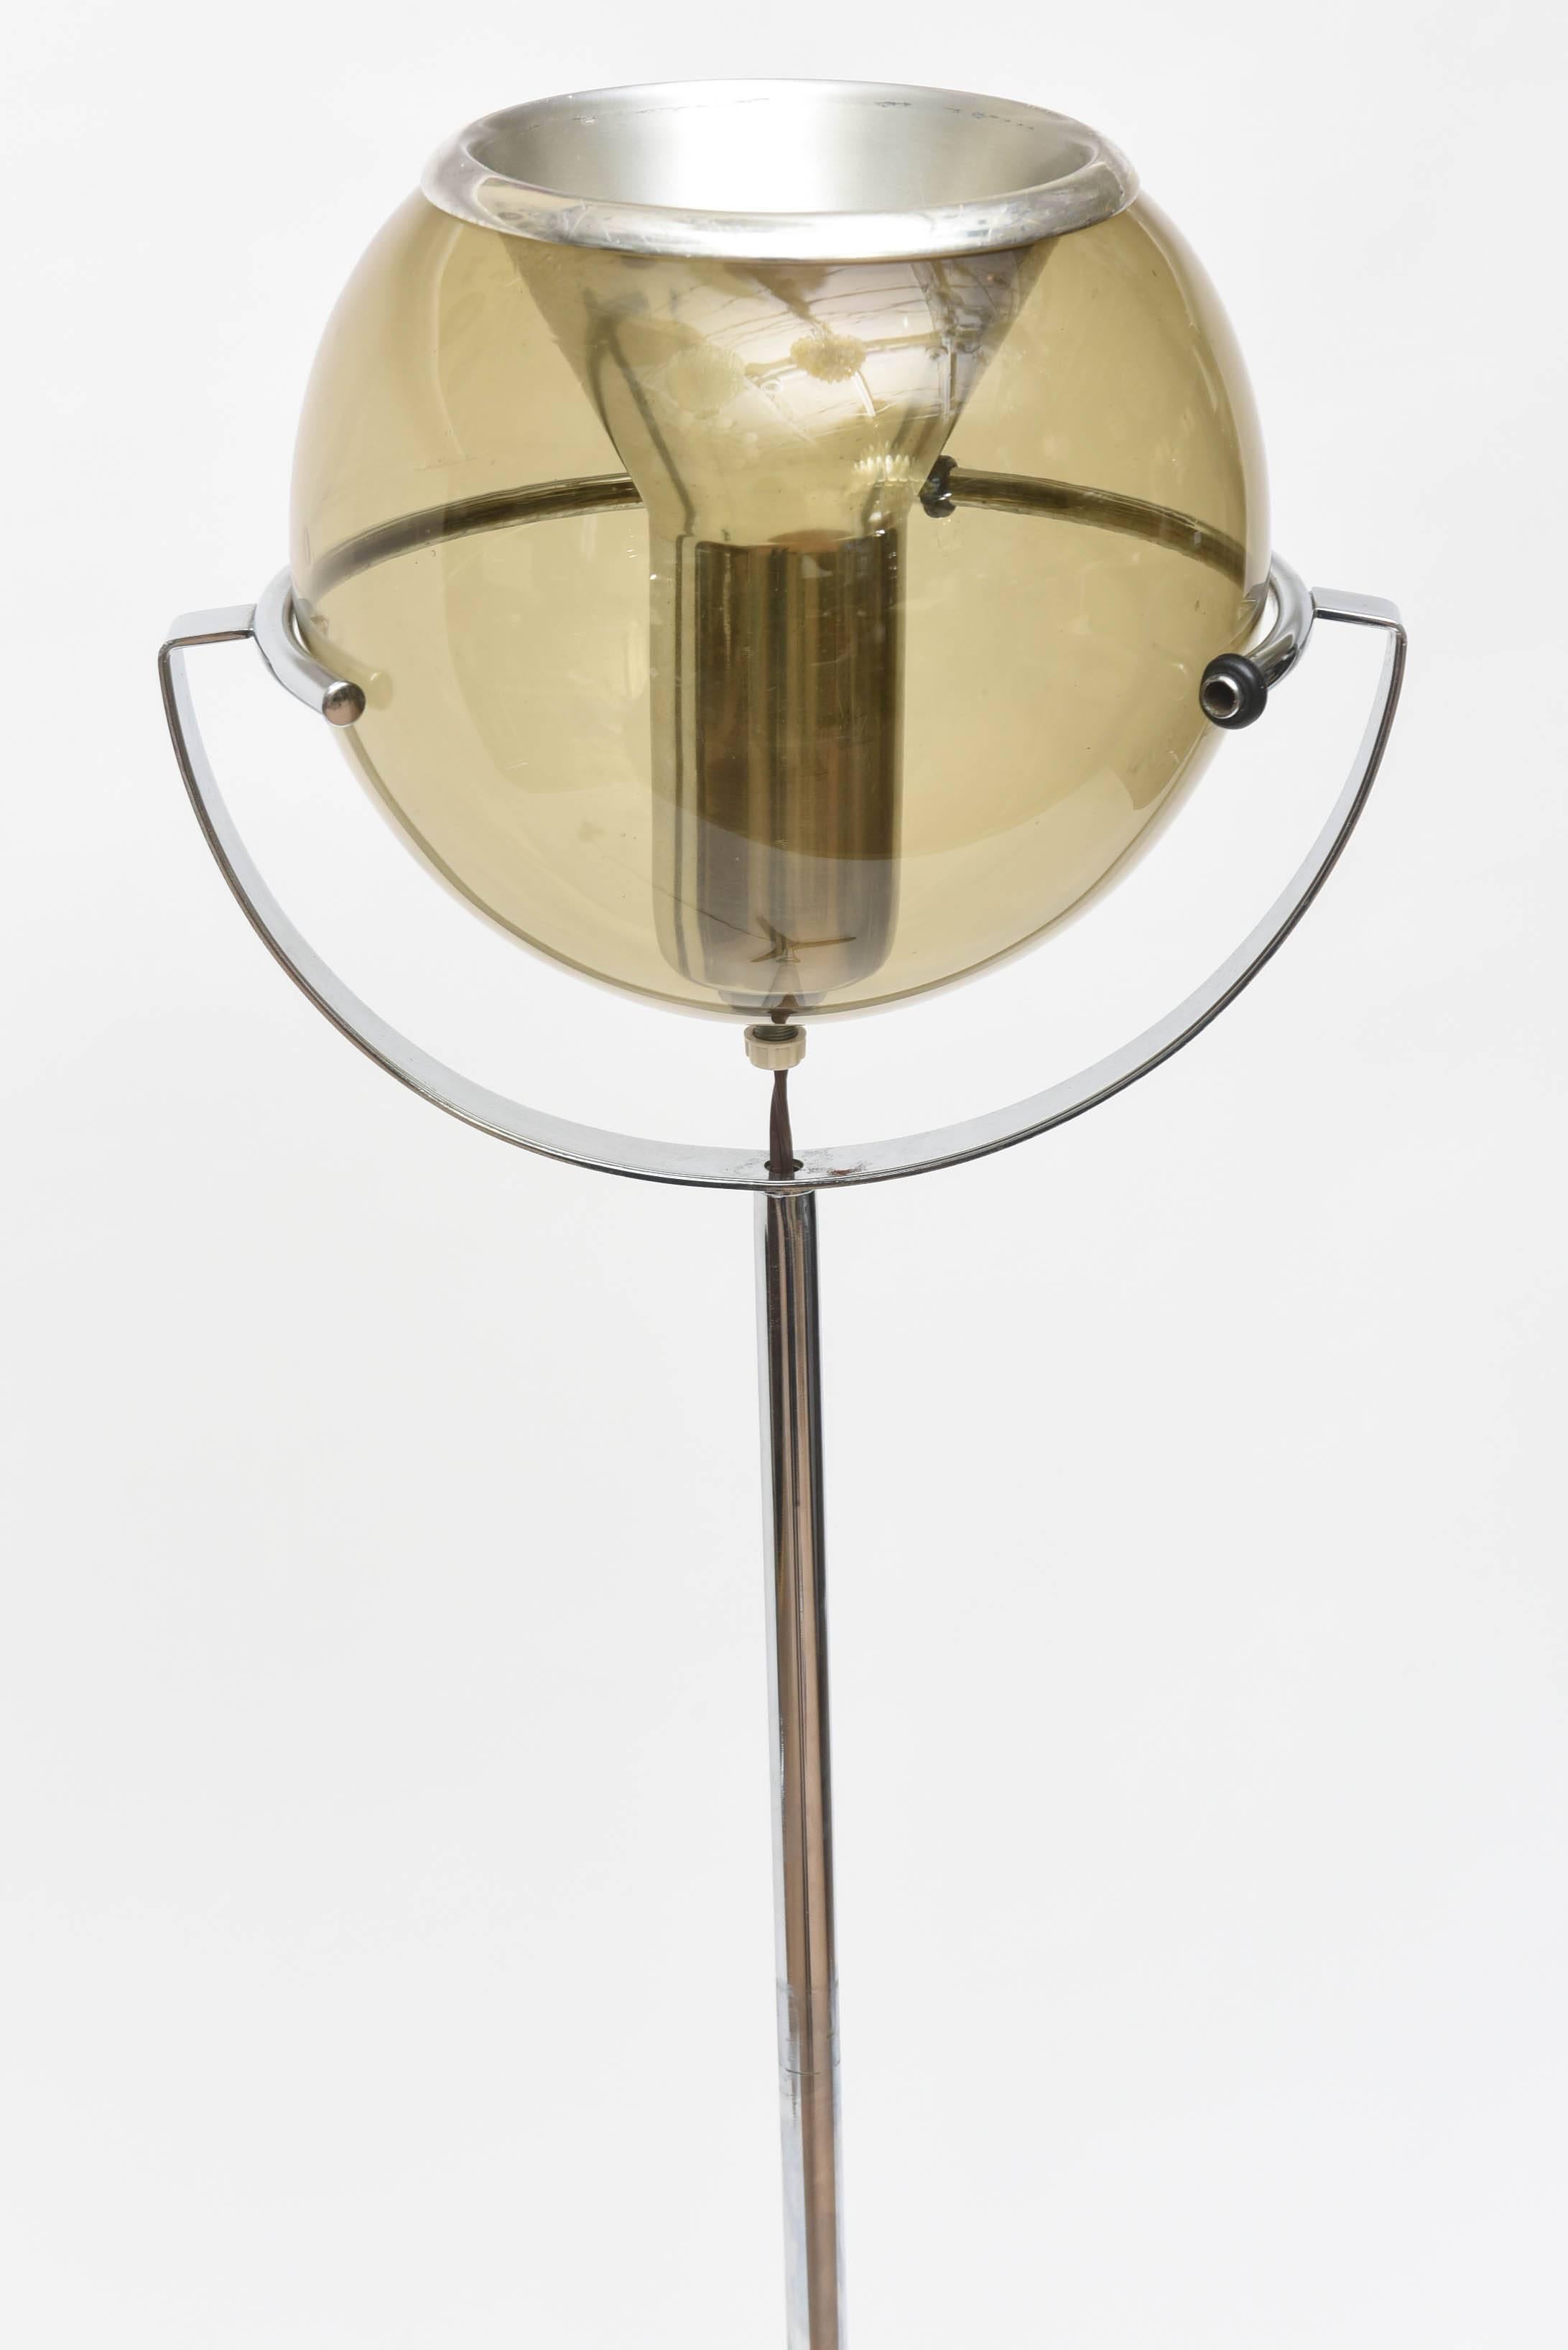 Aluminum floor lamp with adjustable smoked glass globe which is centered by the light source. Max Wattage is 100W.